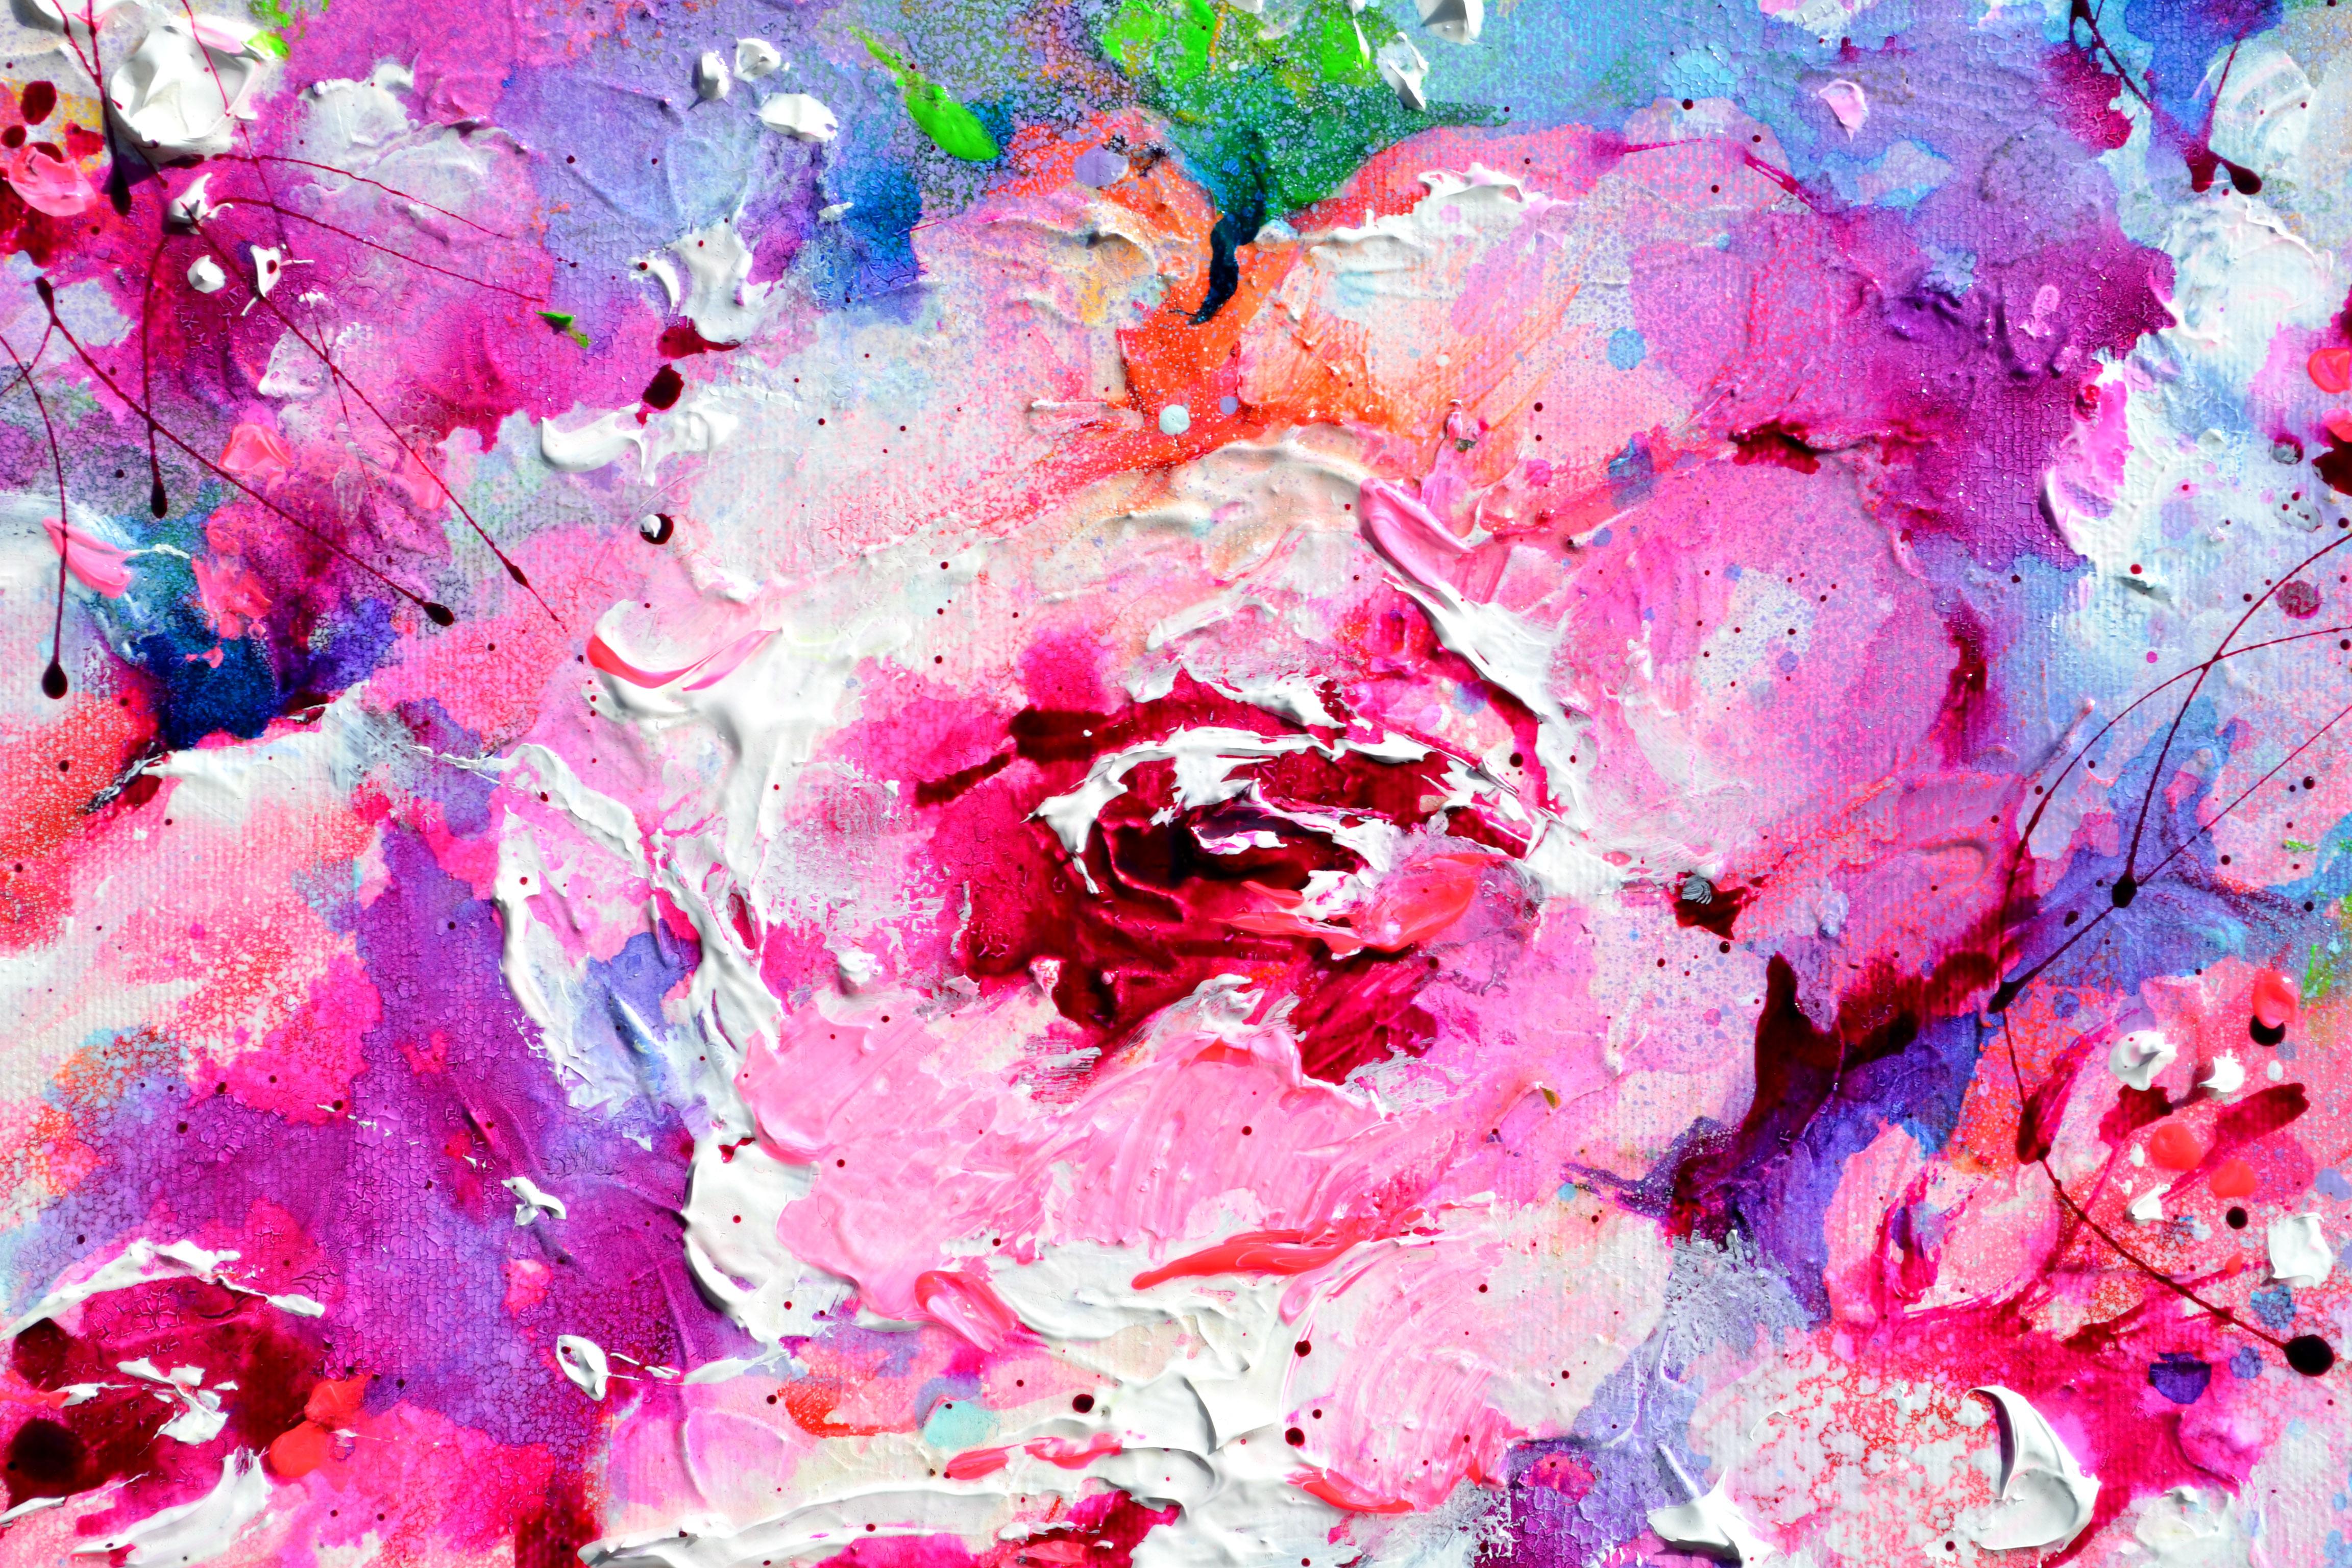 Misty Roses - Pink Rose Bouquet - Impressionist Painting by Soos Roxana Gabriela